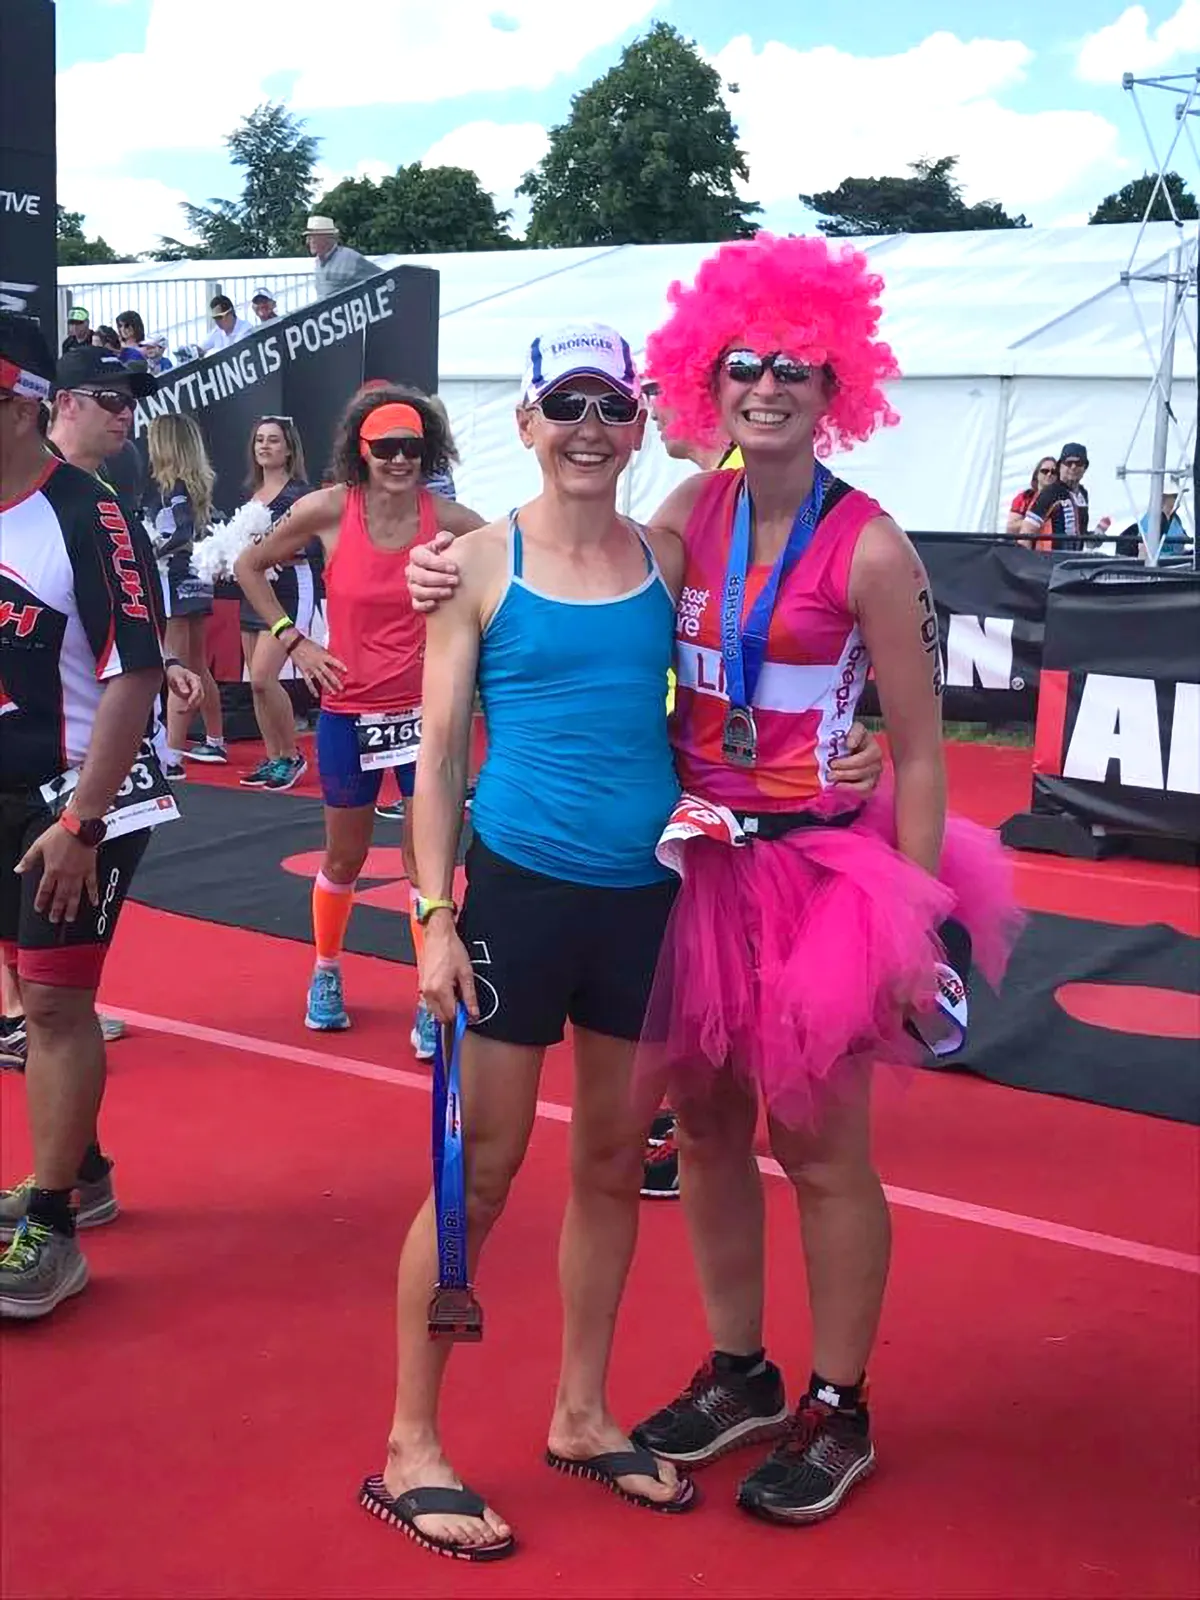 Cancer doctor and former pro Lucy Gossage, left, presents Dr Liz O'Riordan with her medal at Ironman 70.3 Staffs in 2017